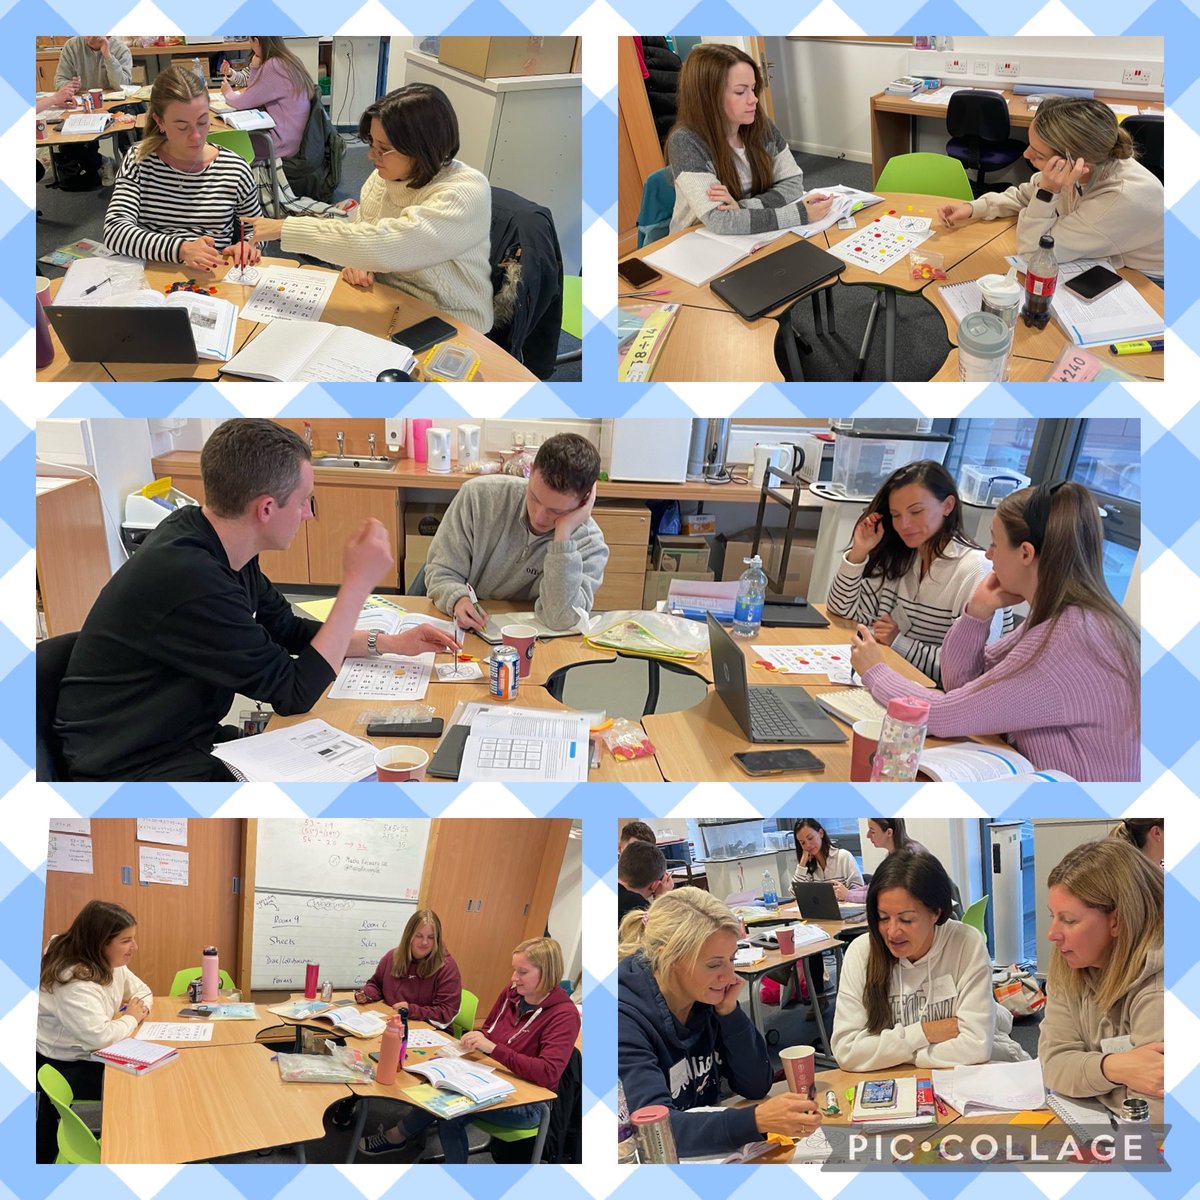 Developing multiplication skills with SL teachers ⁦@MathsRecoveryUK⁩ ‘Developing Number Knowledge’ - Red Book Course- great collaboration and reflections ⁦@edscot_maths⁩ ⁦@SouthLanCouncil⁩